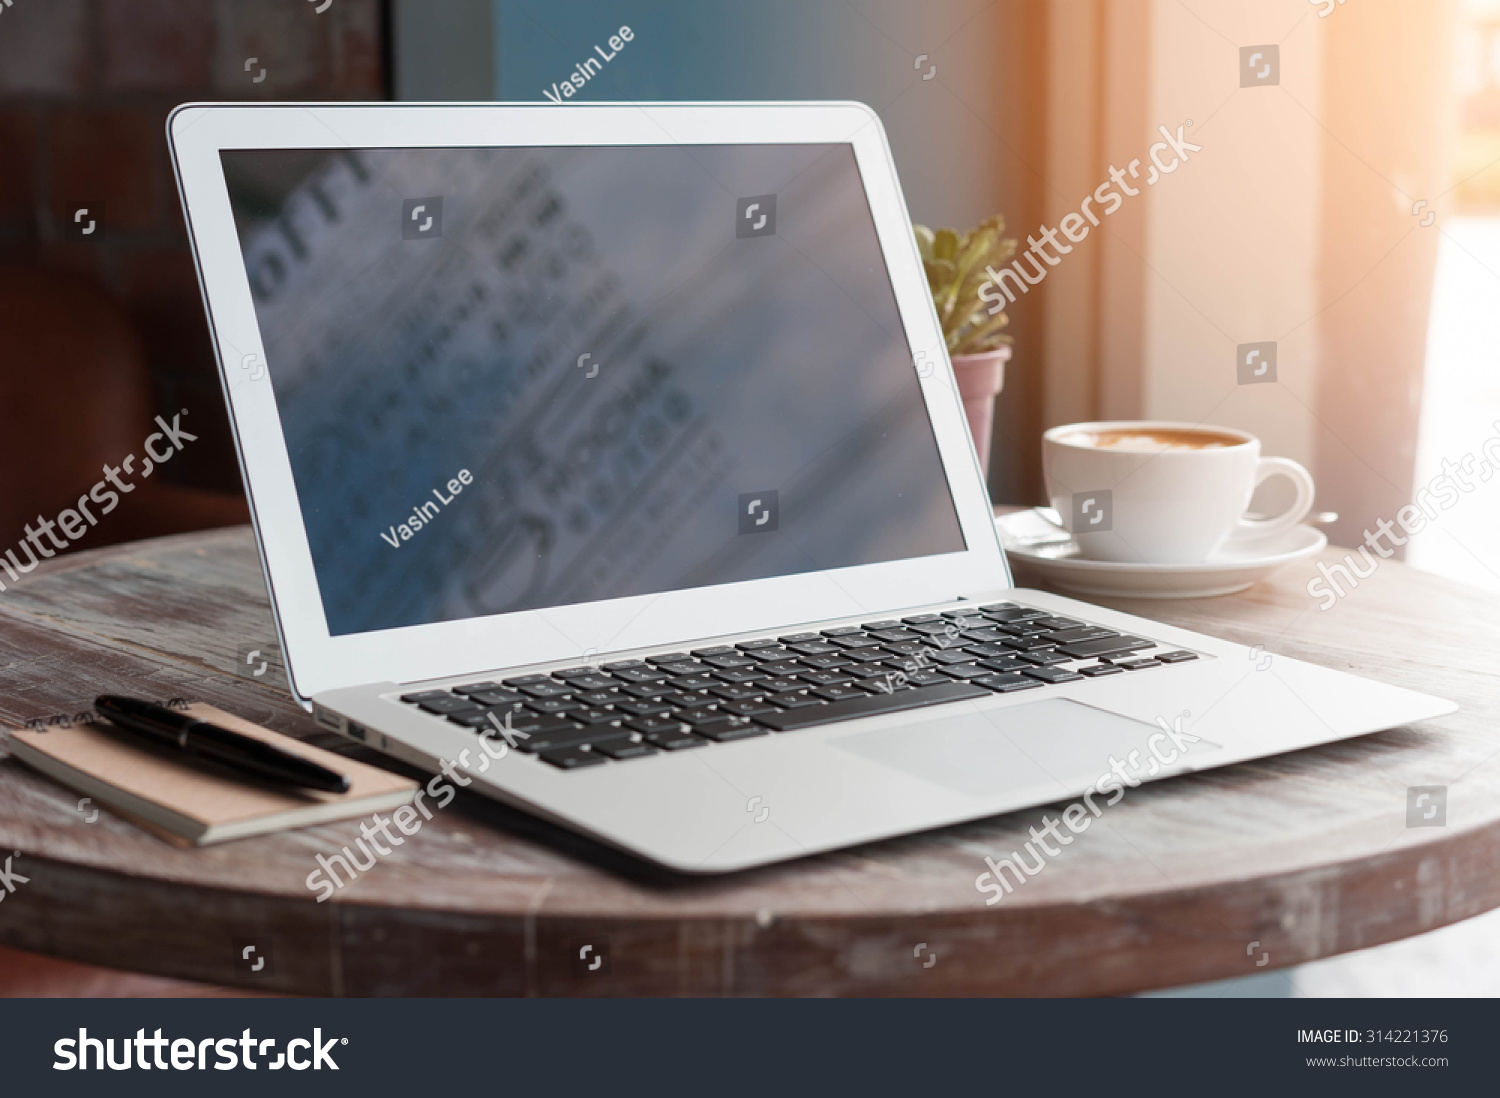 Laptop with tablet, pen and a cup of fresh coffee latte art on wooden table in coffee shop #314221376